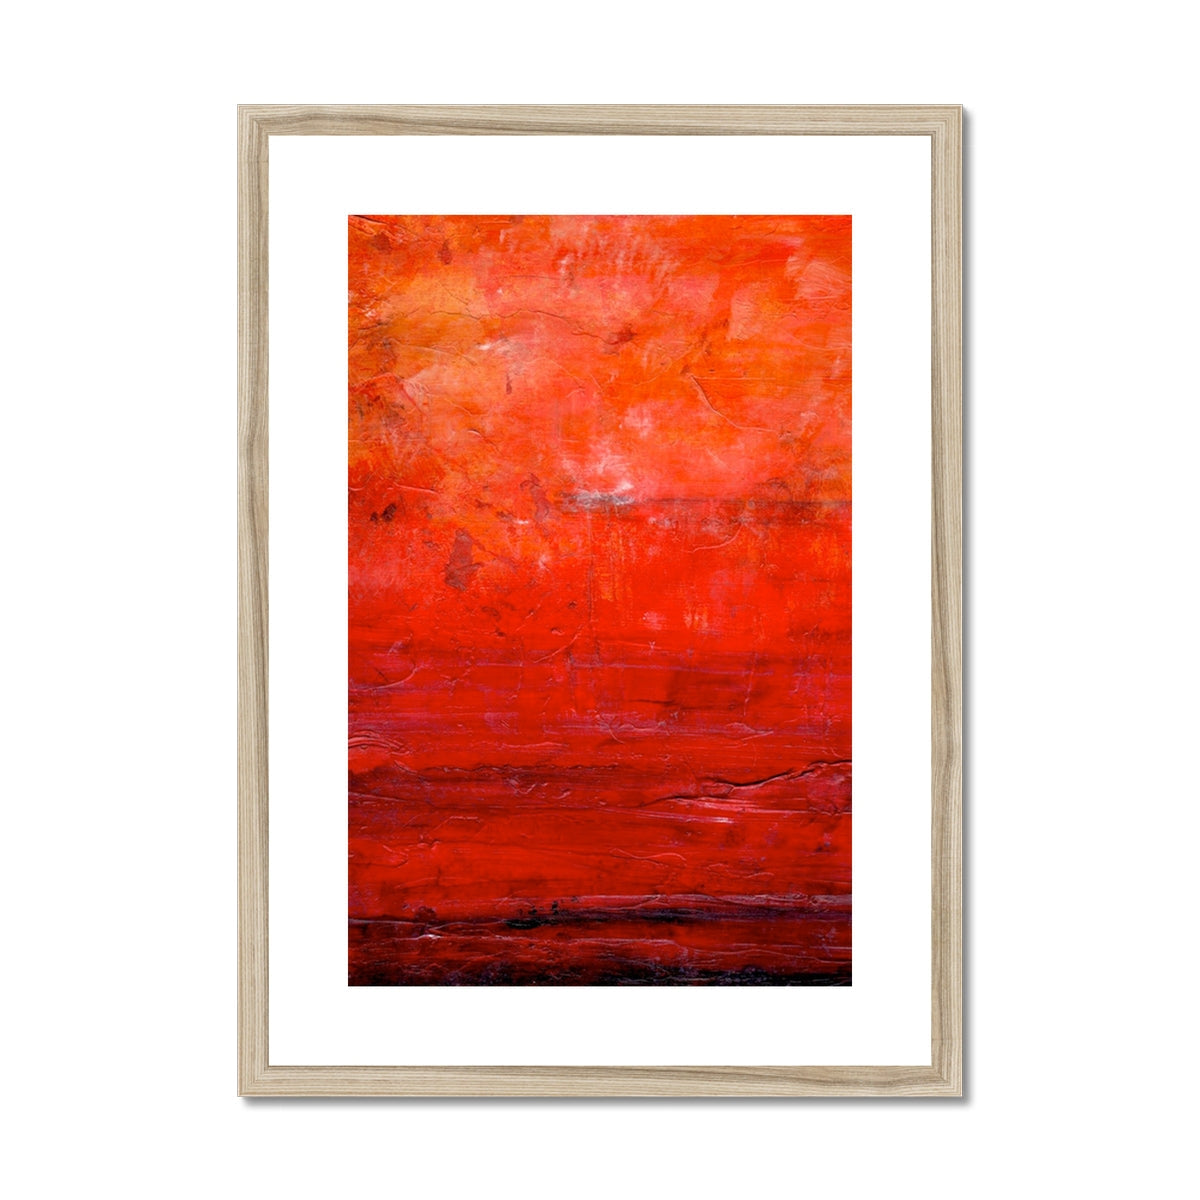 Abstract Summer Painting | Framed & Mounted Prints From Scotland-Framed & Mounted Prints-Abstract & Impressionistic Art Gallery-A2 Portrait-Natural Frame-Paintings, Prints, Homeware, Art Gifts From Scotland By Scottish Artist Kevin Hunter